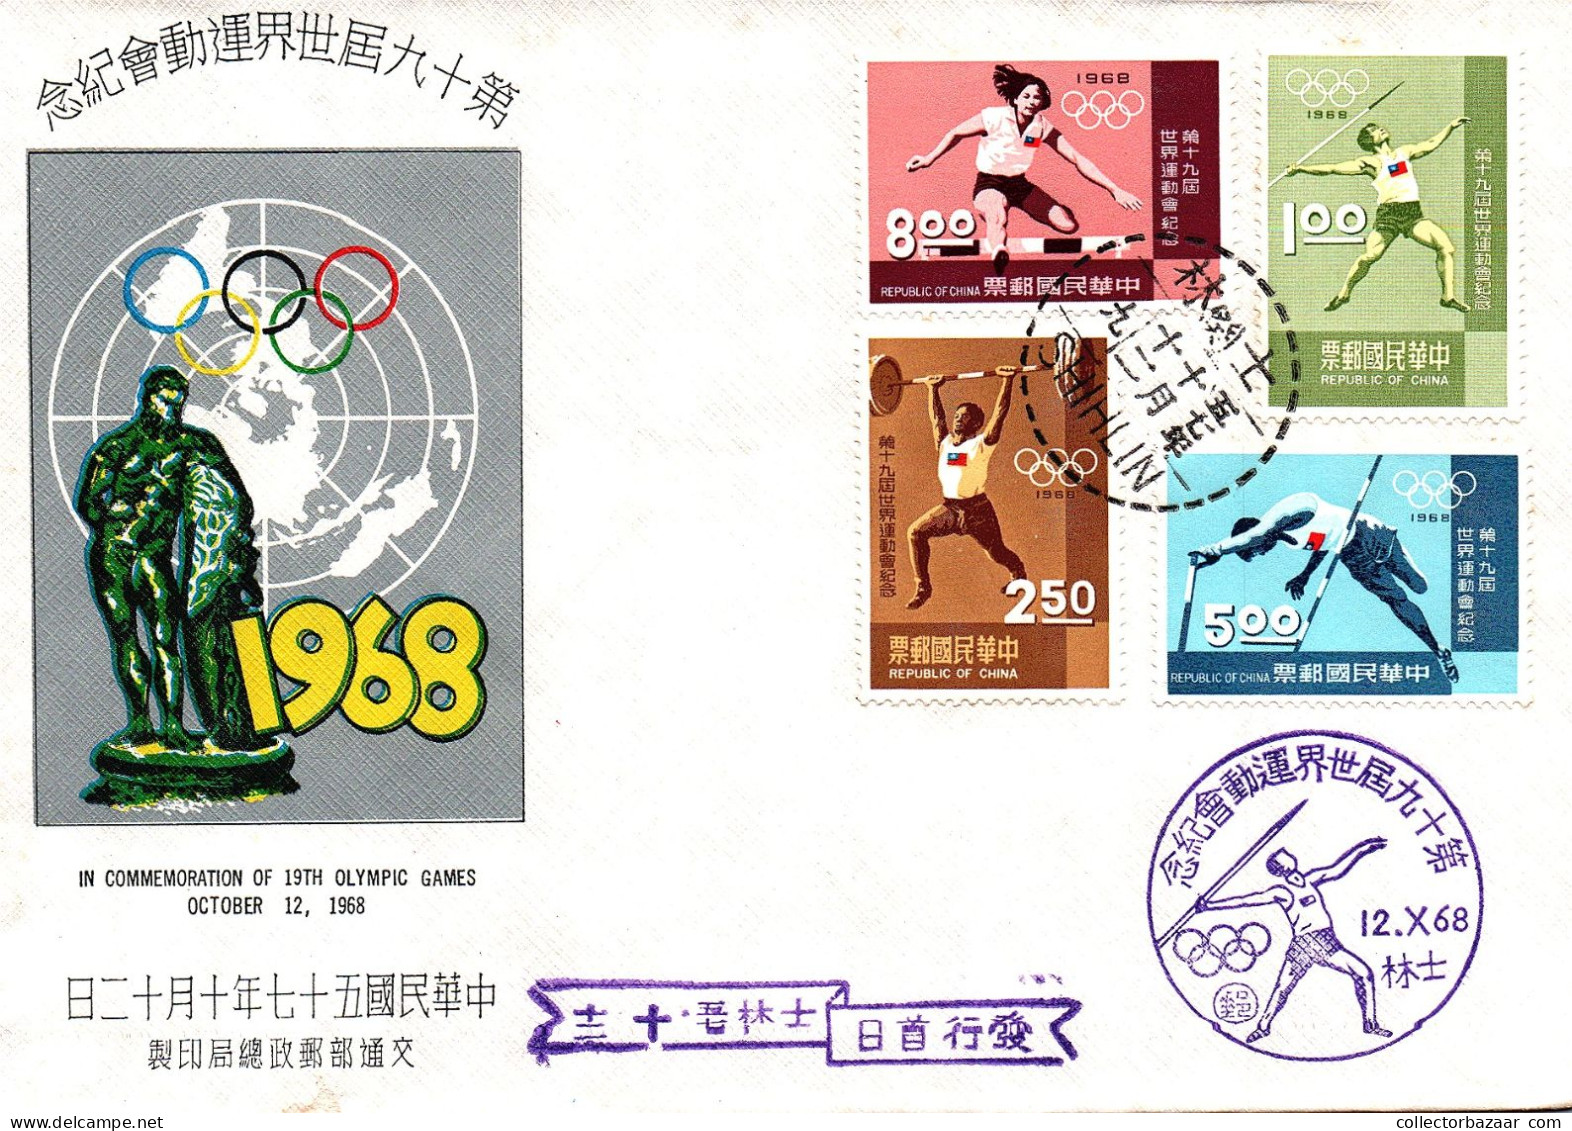 Taiwan Formosa Republic Of China FDC Commemoration Of 19th Olympic Games October 12,1968 - 8$, 5$, 2.50$ And 1$ Stamp - FDC